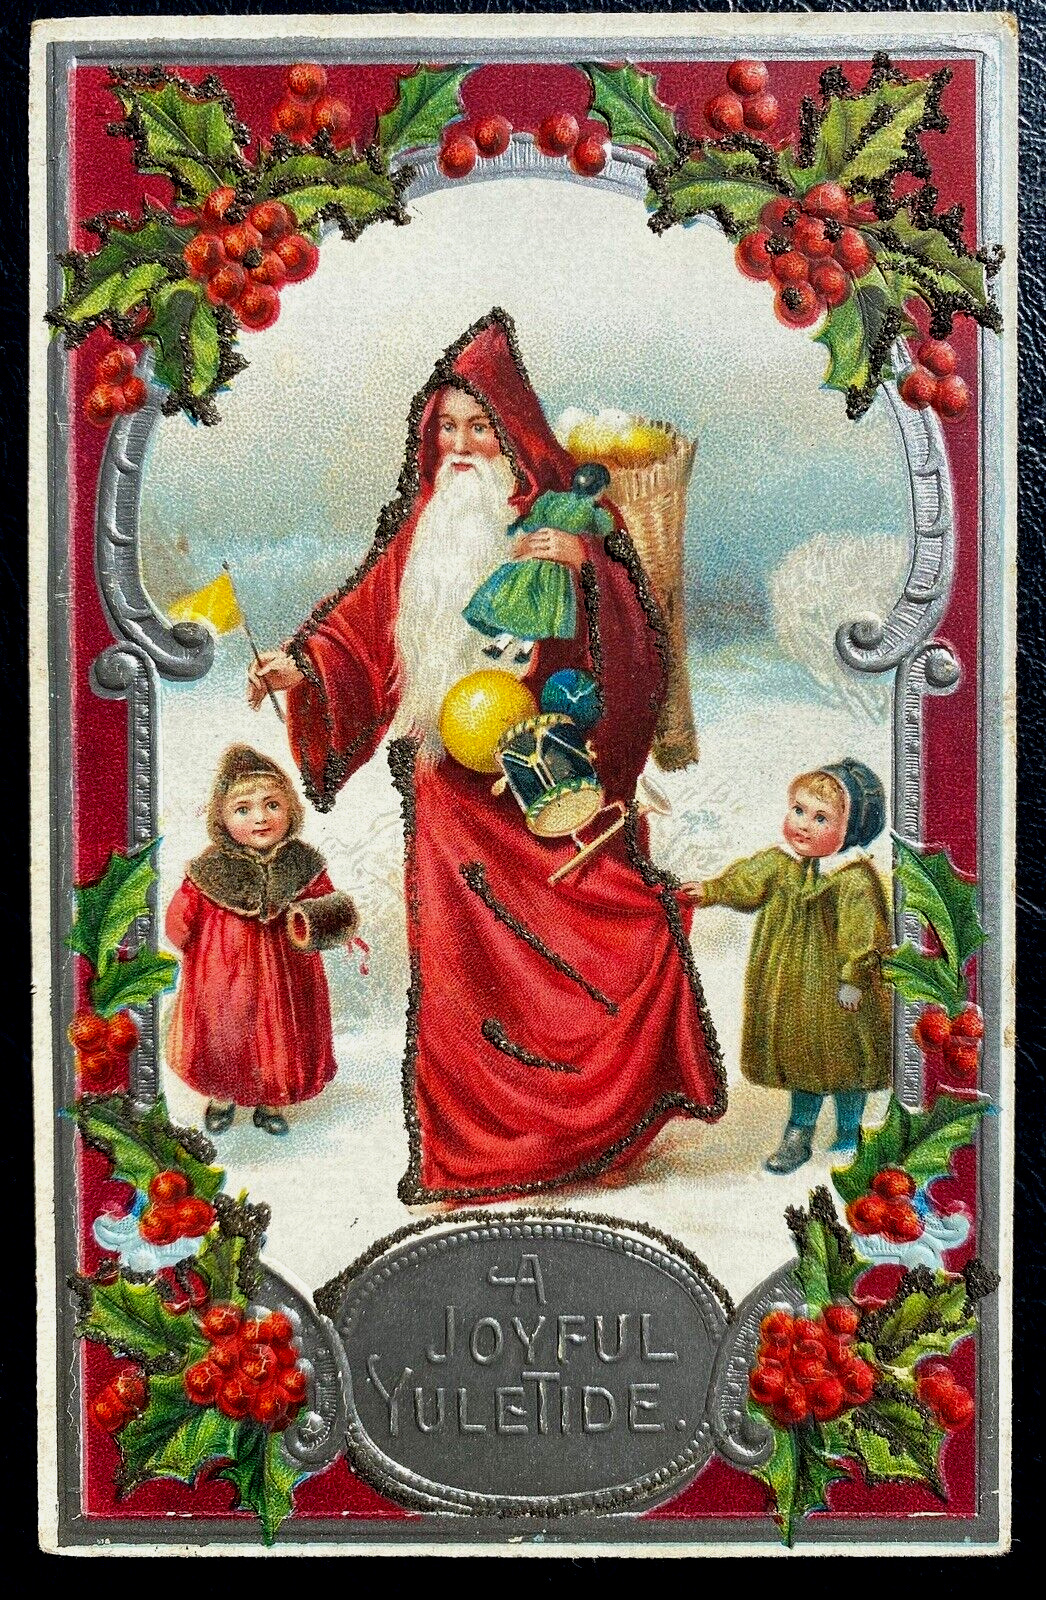 Red Robe Santa Claus with Children~Toys~Holly~Antique~Christmas Postcard~k273